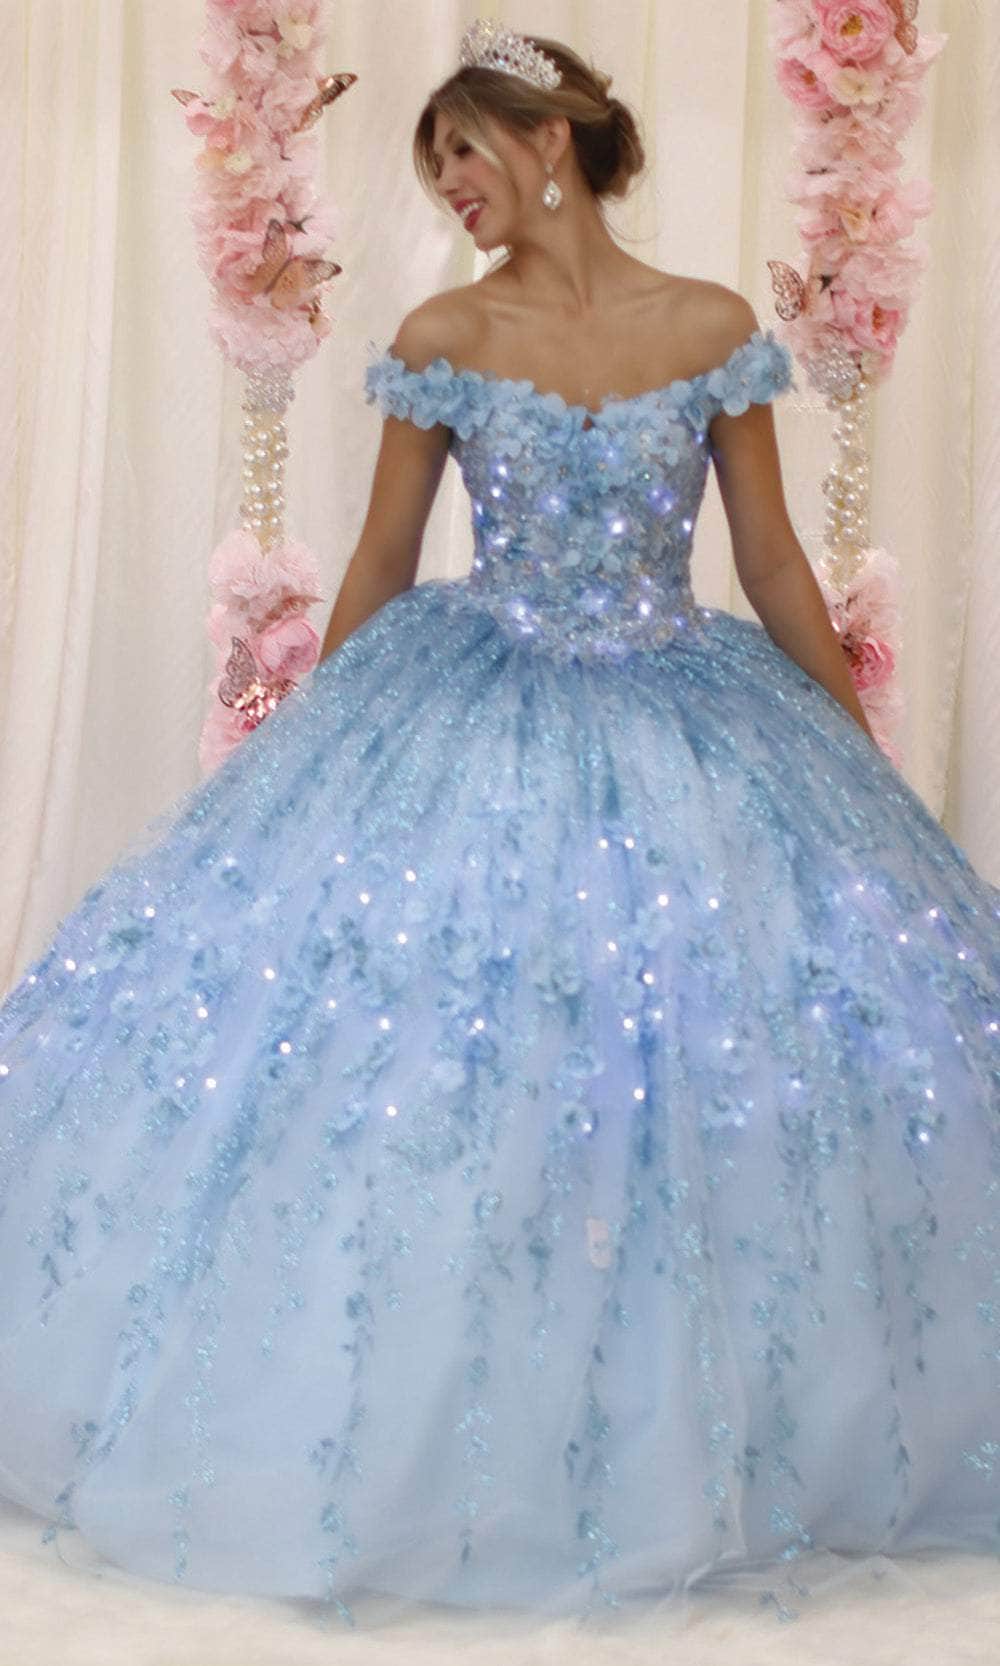 Image of May Queen LK198 - Off Shoulder Glittered Ballgown